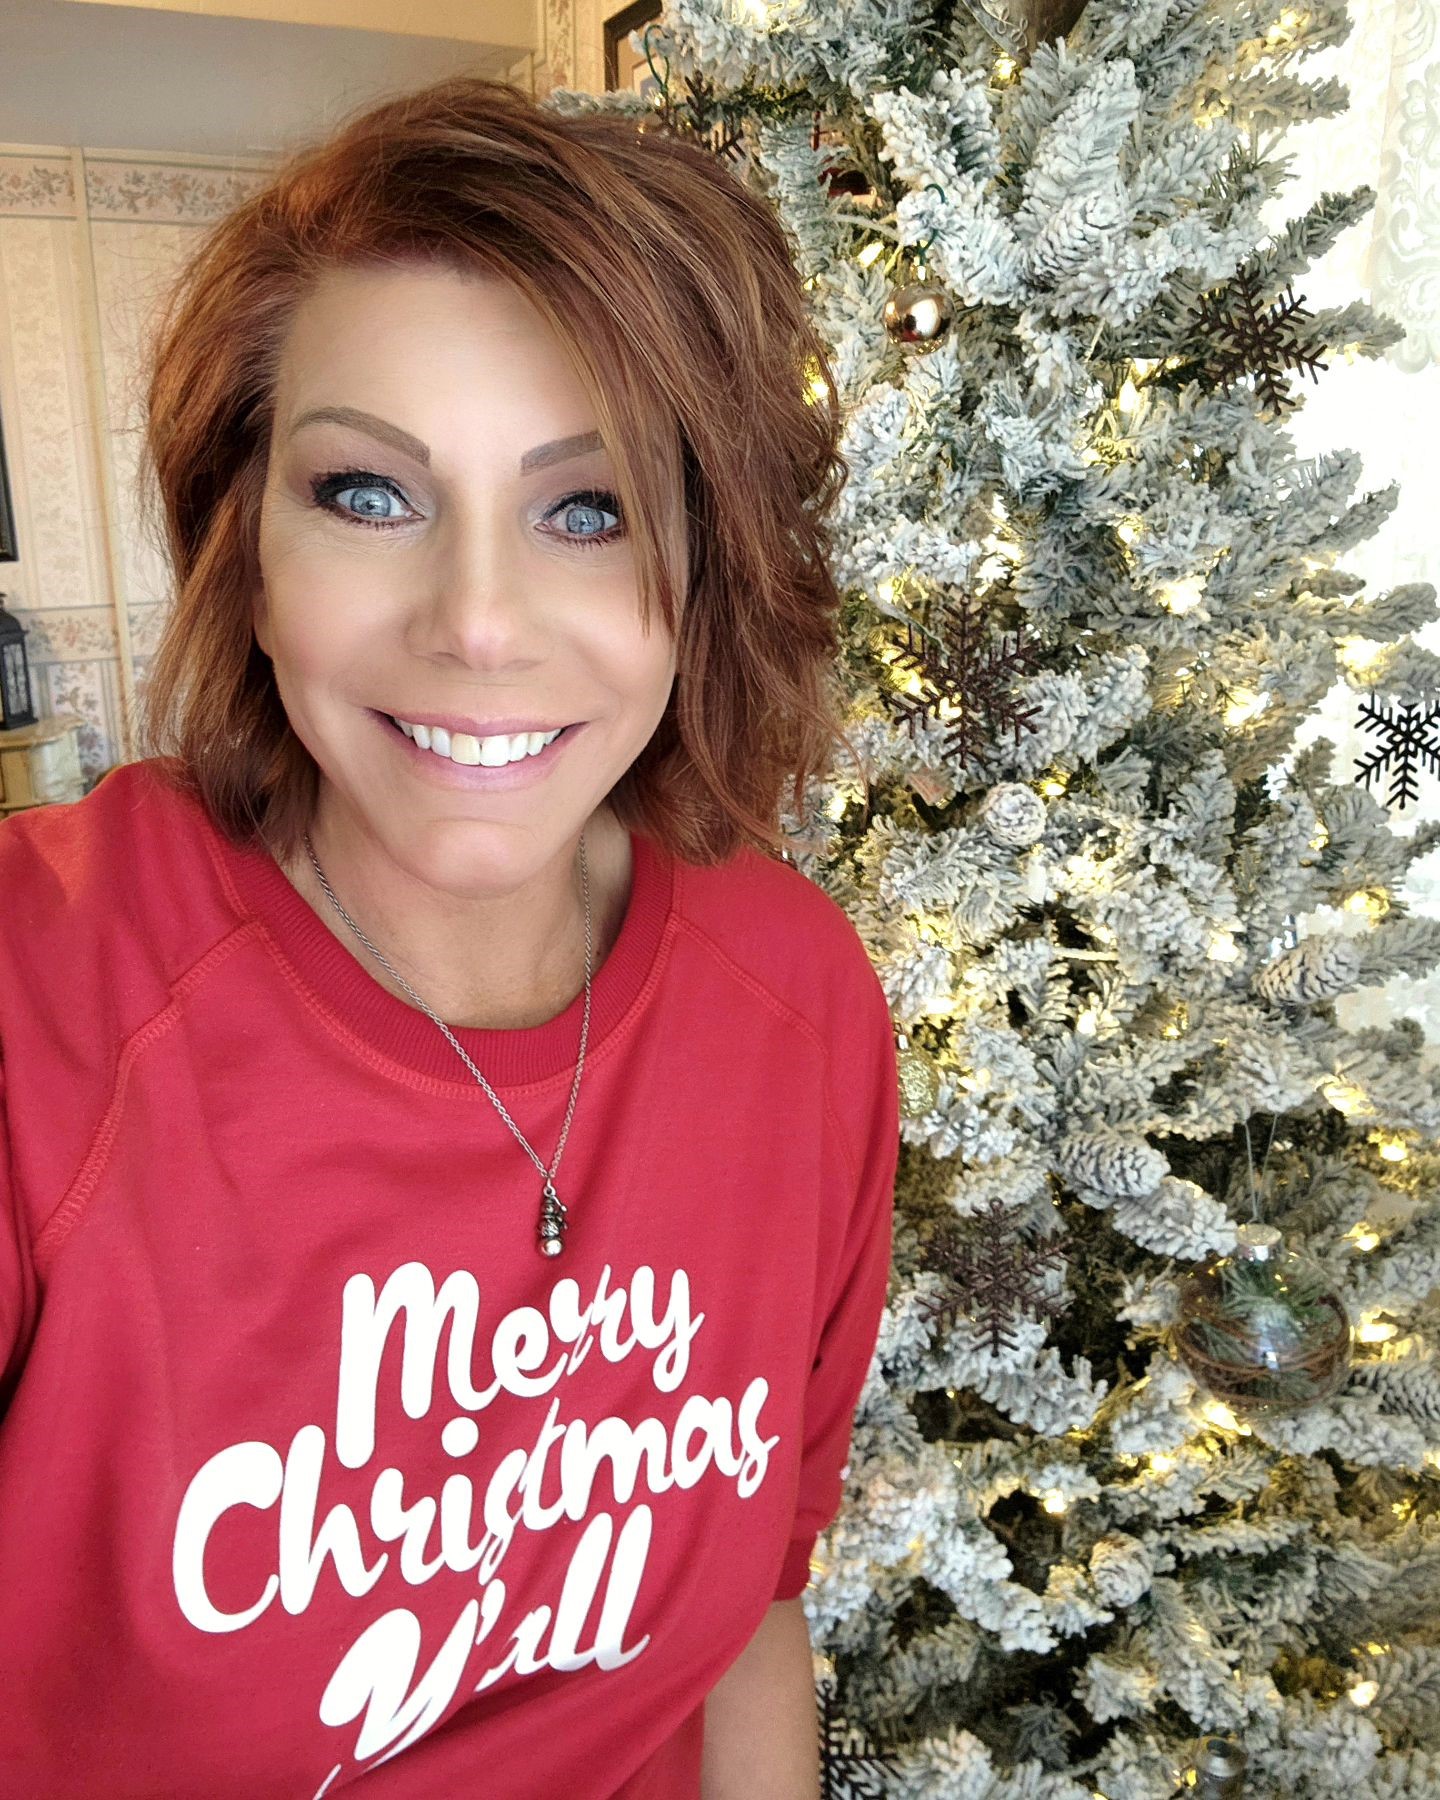 Critics commented on the TLC star's use of filters after Meri posted a holiday photo of herself on Instagram wishing fans a 'Merry Christmas'